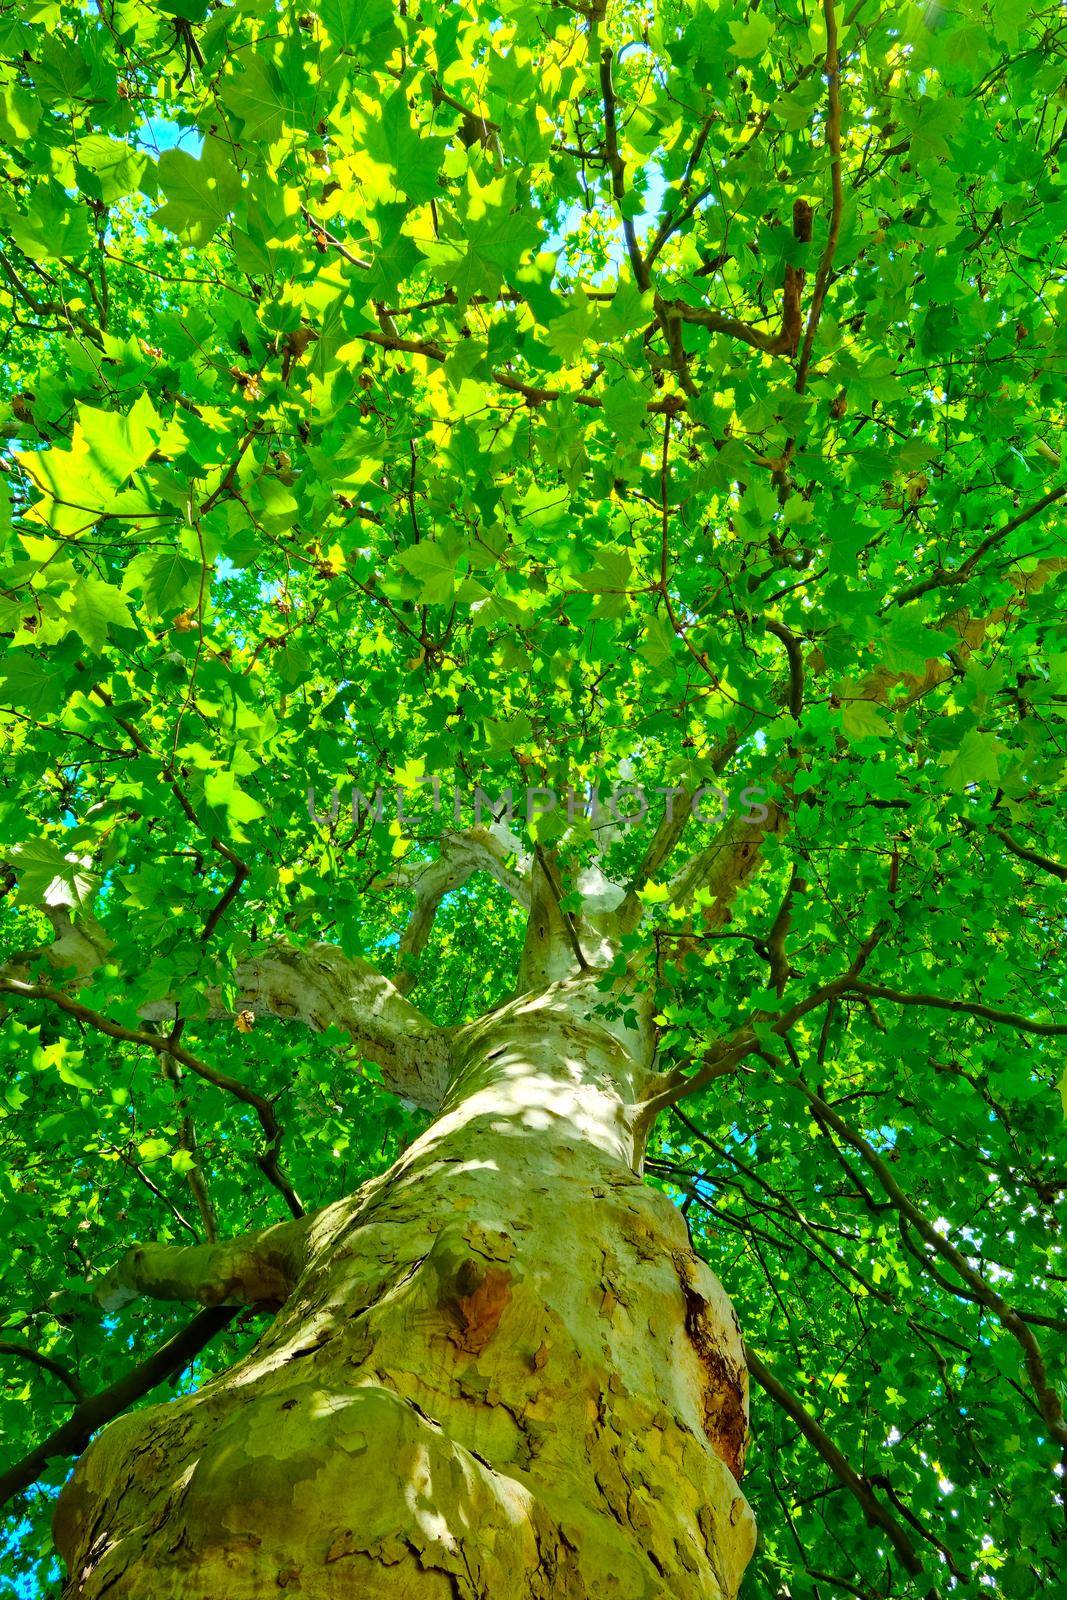 Bottom-up view of the green branches of the tree